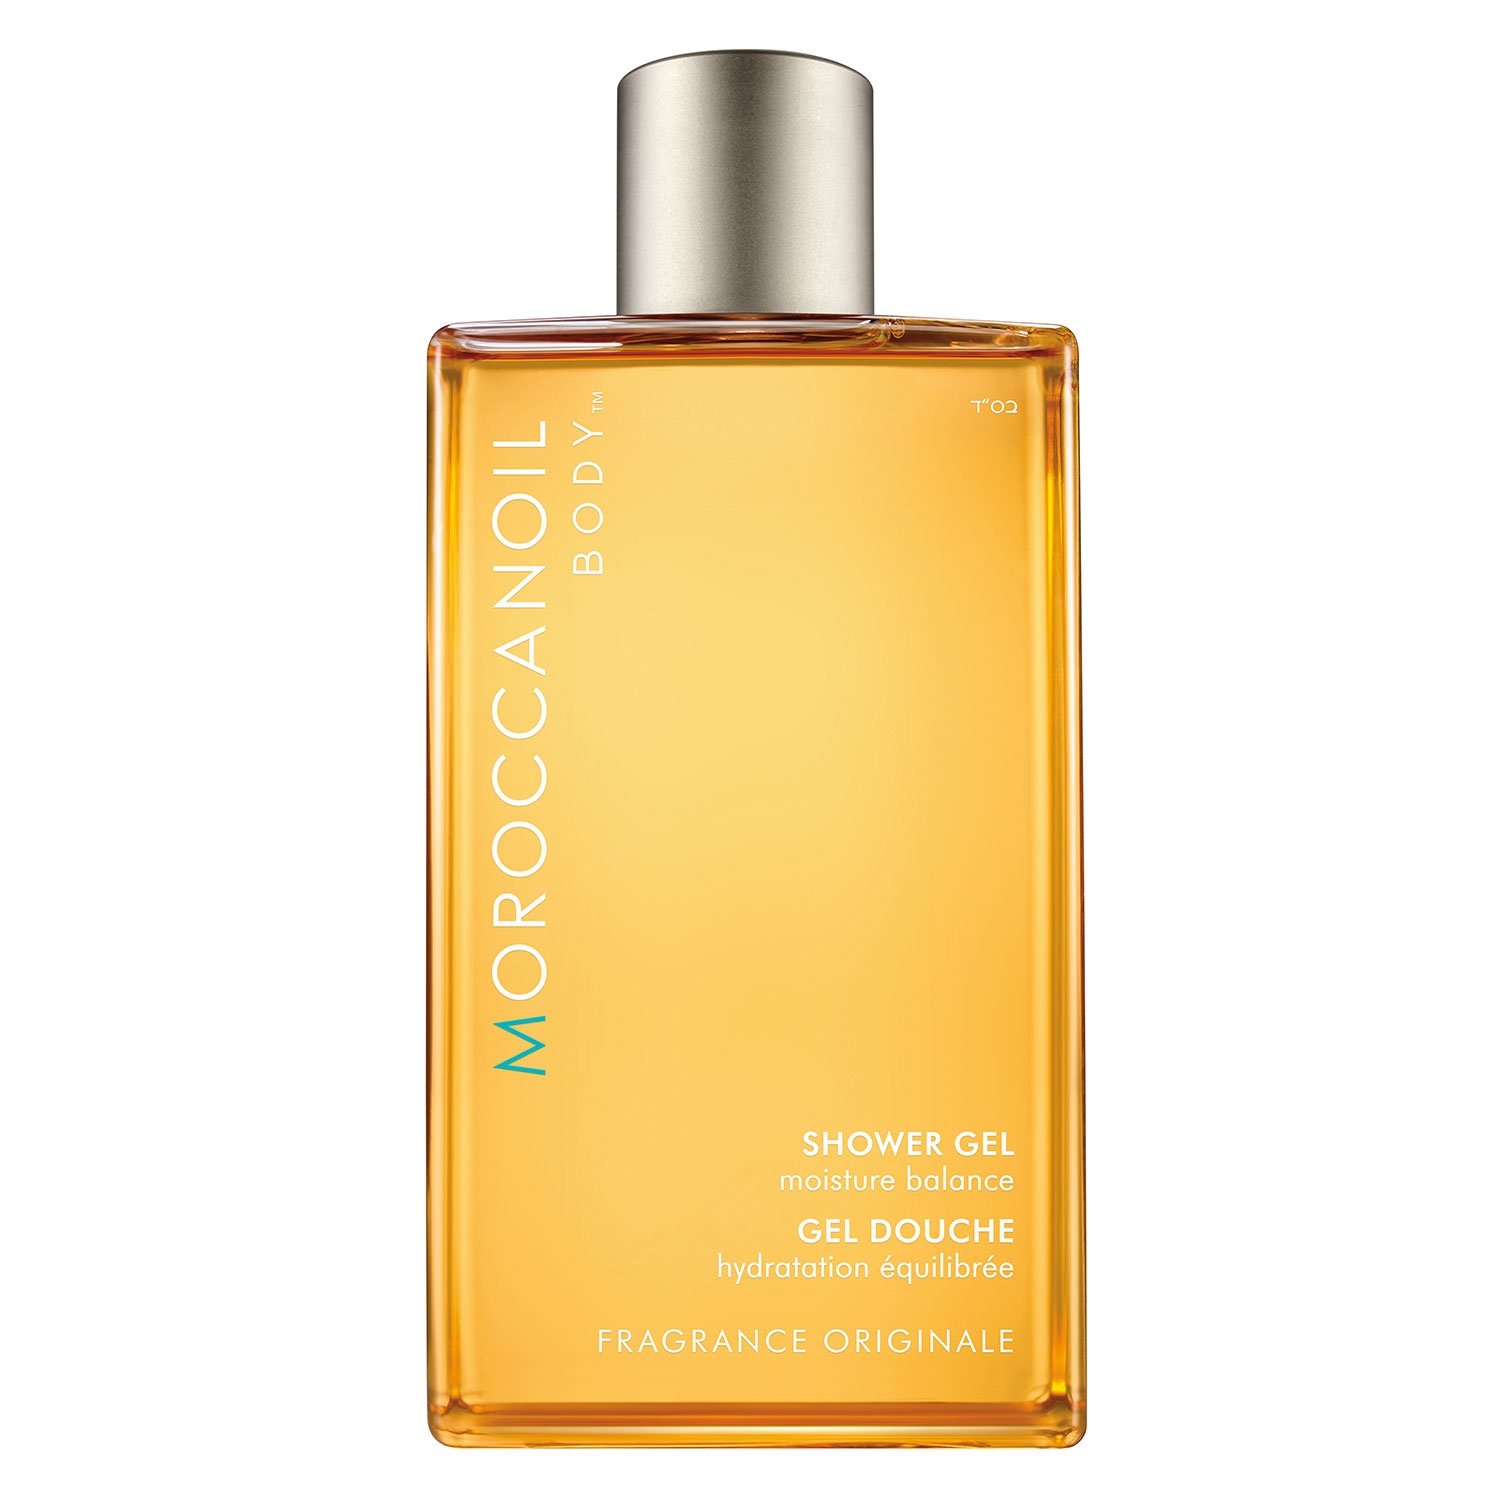 Product image from Moroccanoil Body - Shower Gel Fragrance Originale